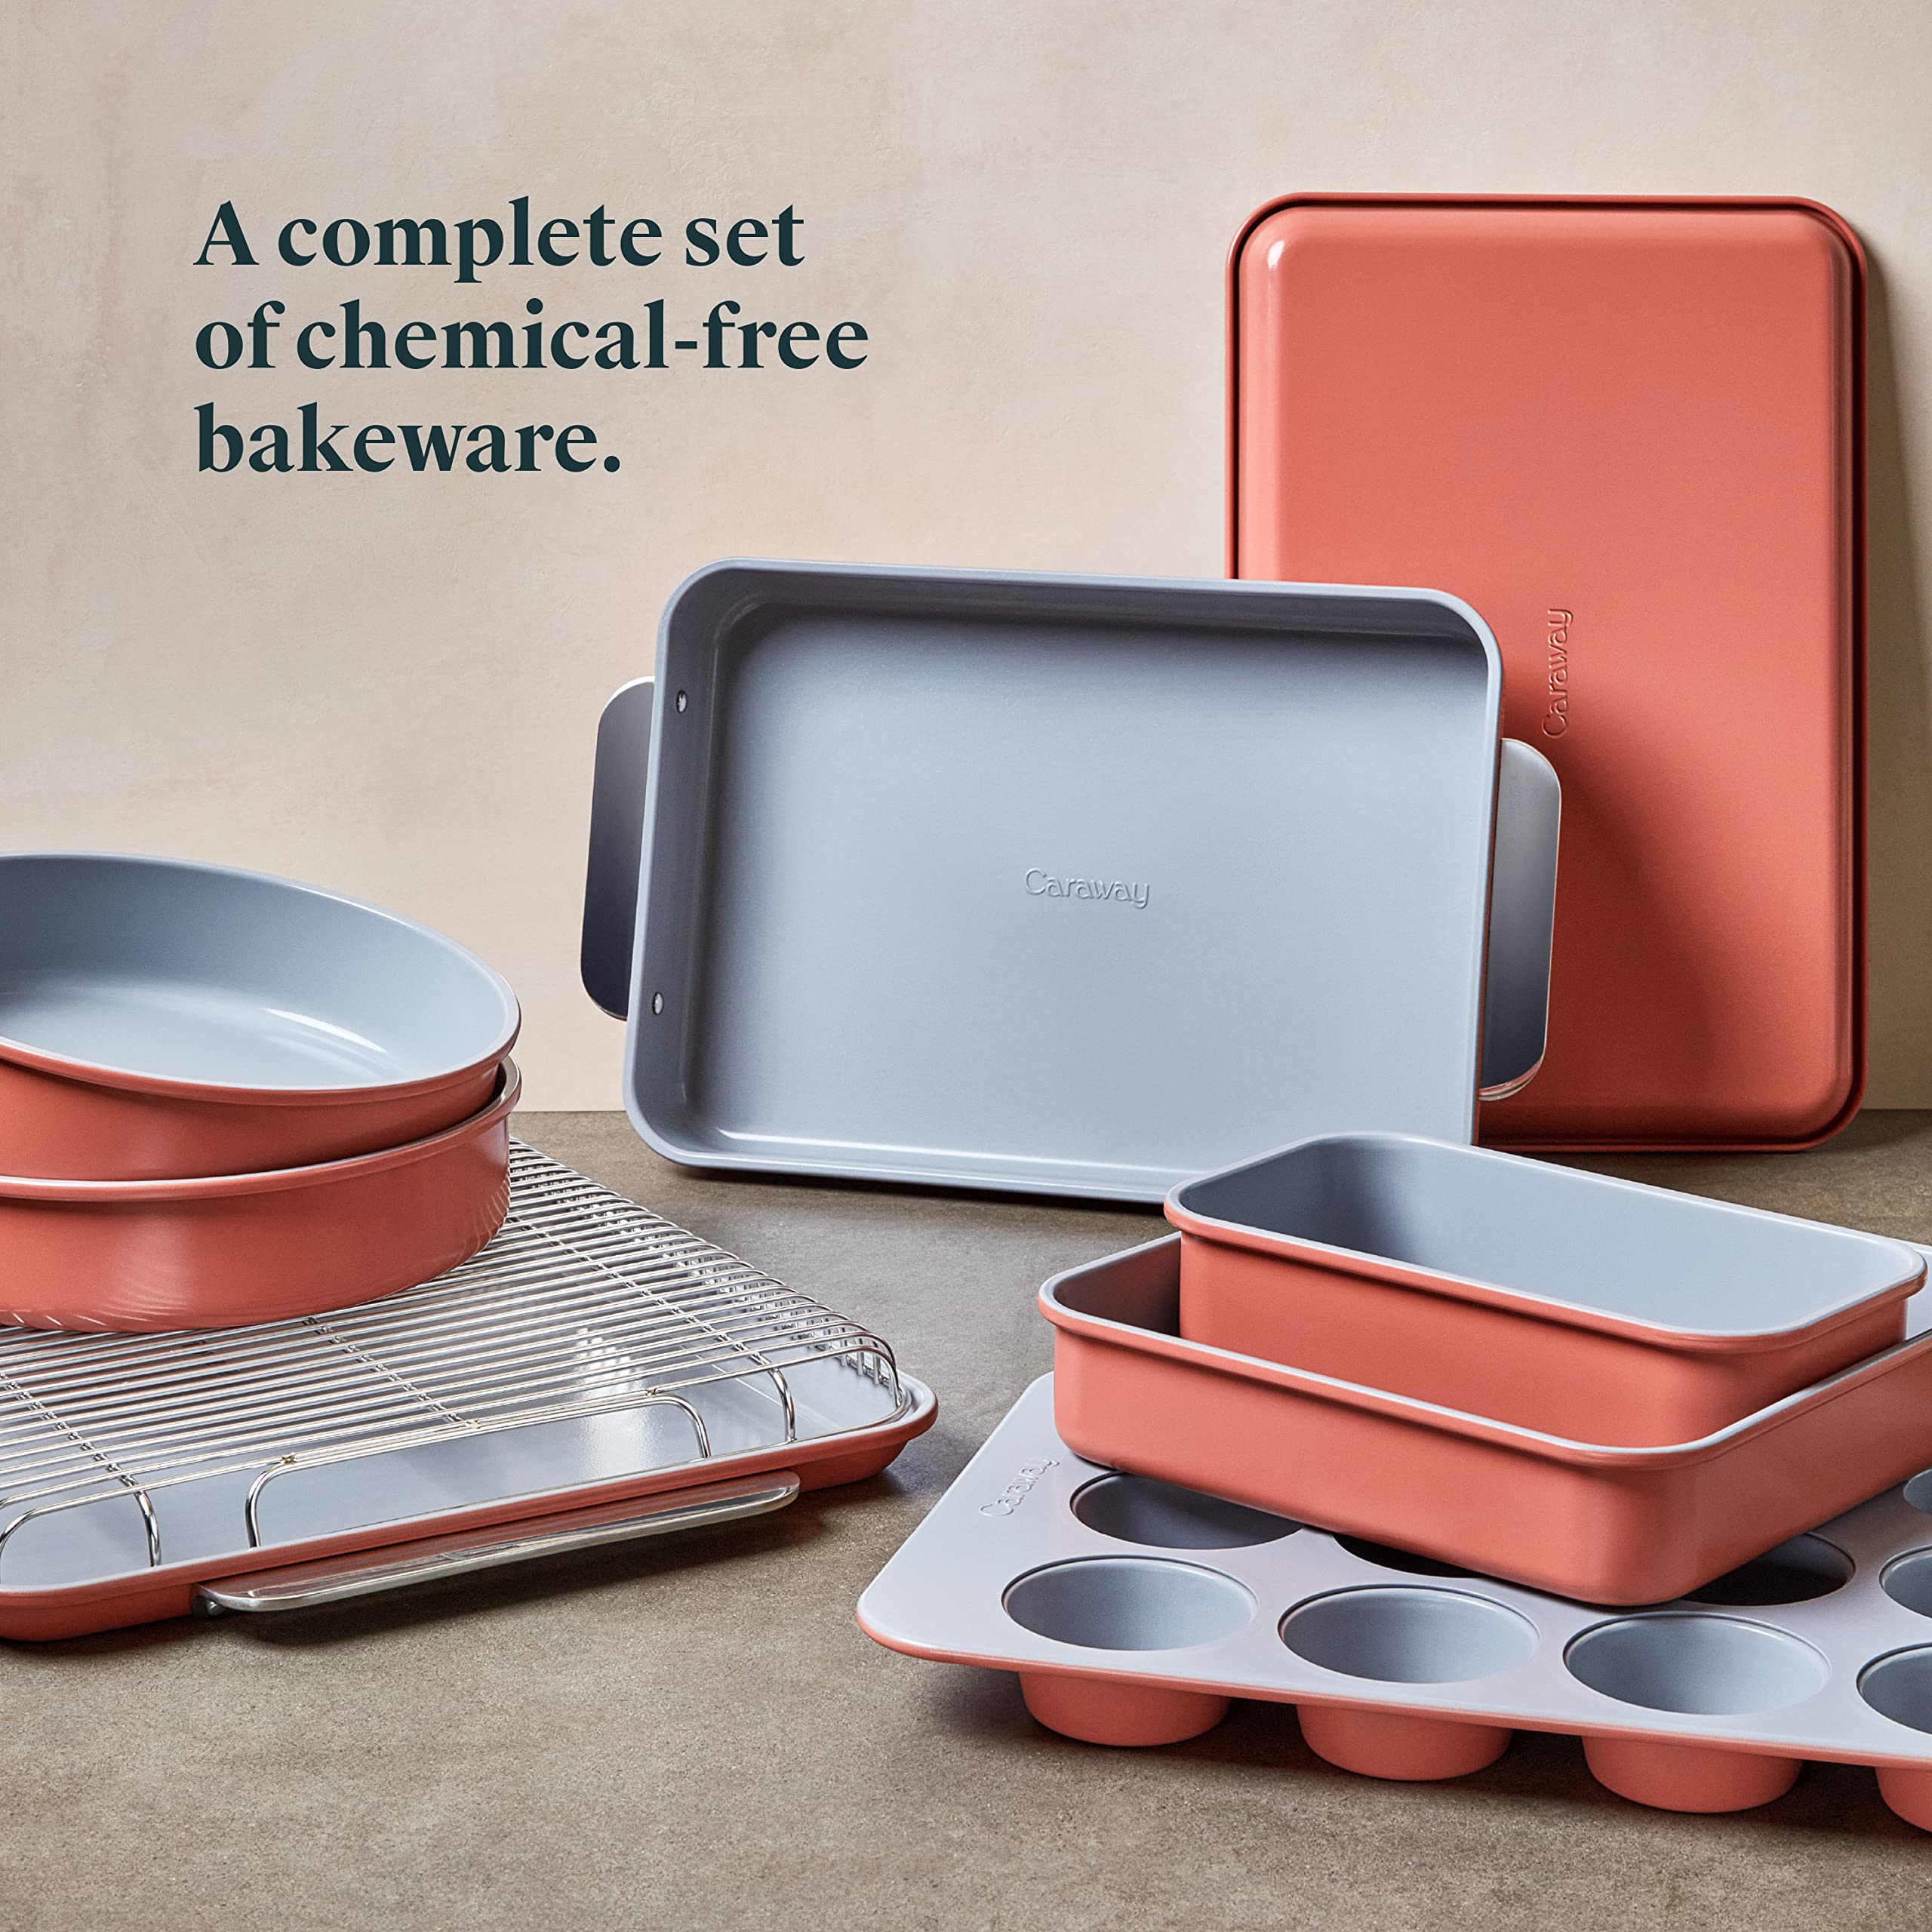 Caraway Nonstick Ceramic Bakeware Set (11 Pieces) - Baking Sheets, Assorted Baking Pans, Cooling Rack, & Storage - Aluminized Steel Body - Non Toxic, PTFE & PFOA Free - Perracotta